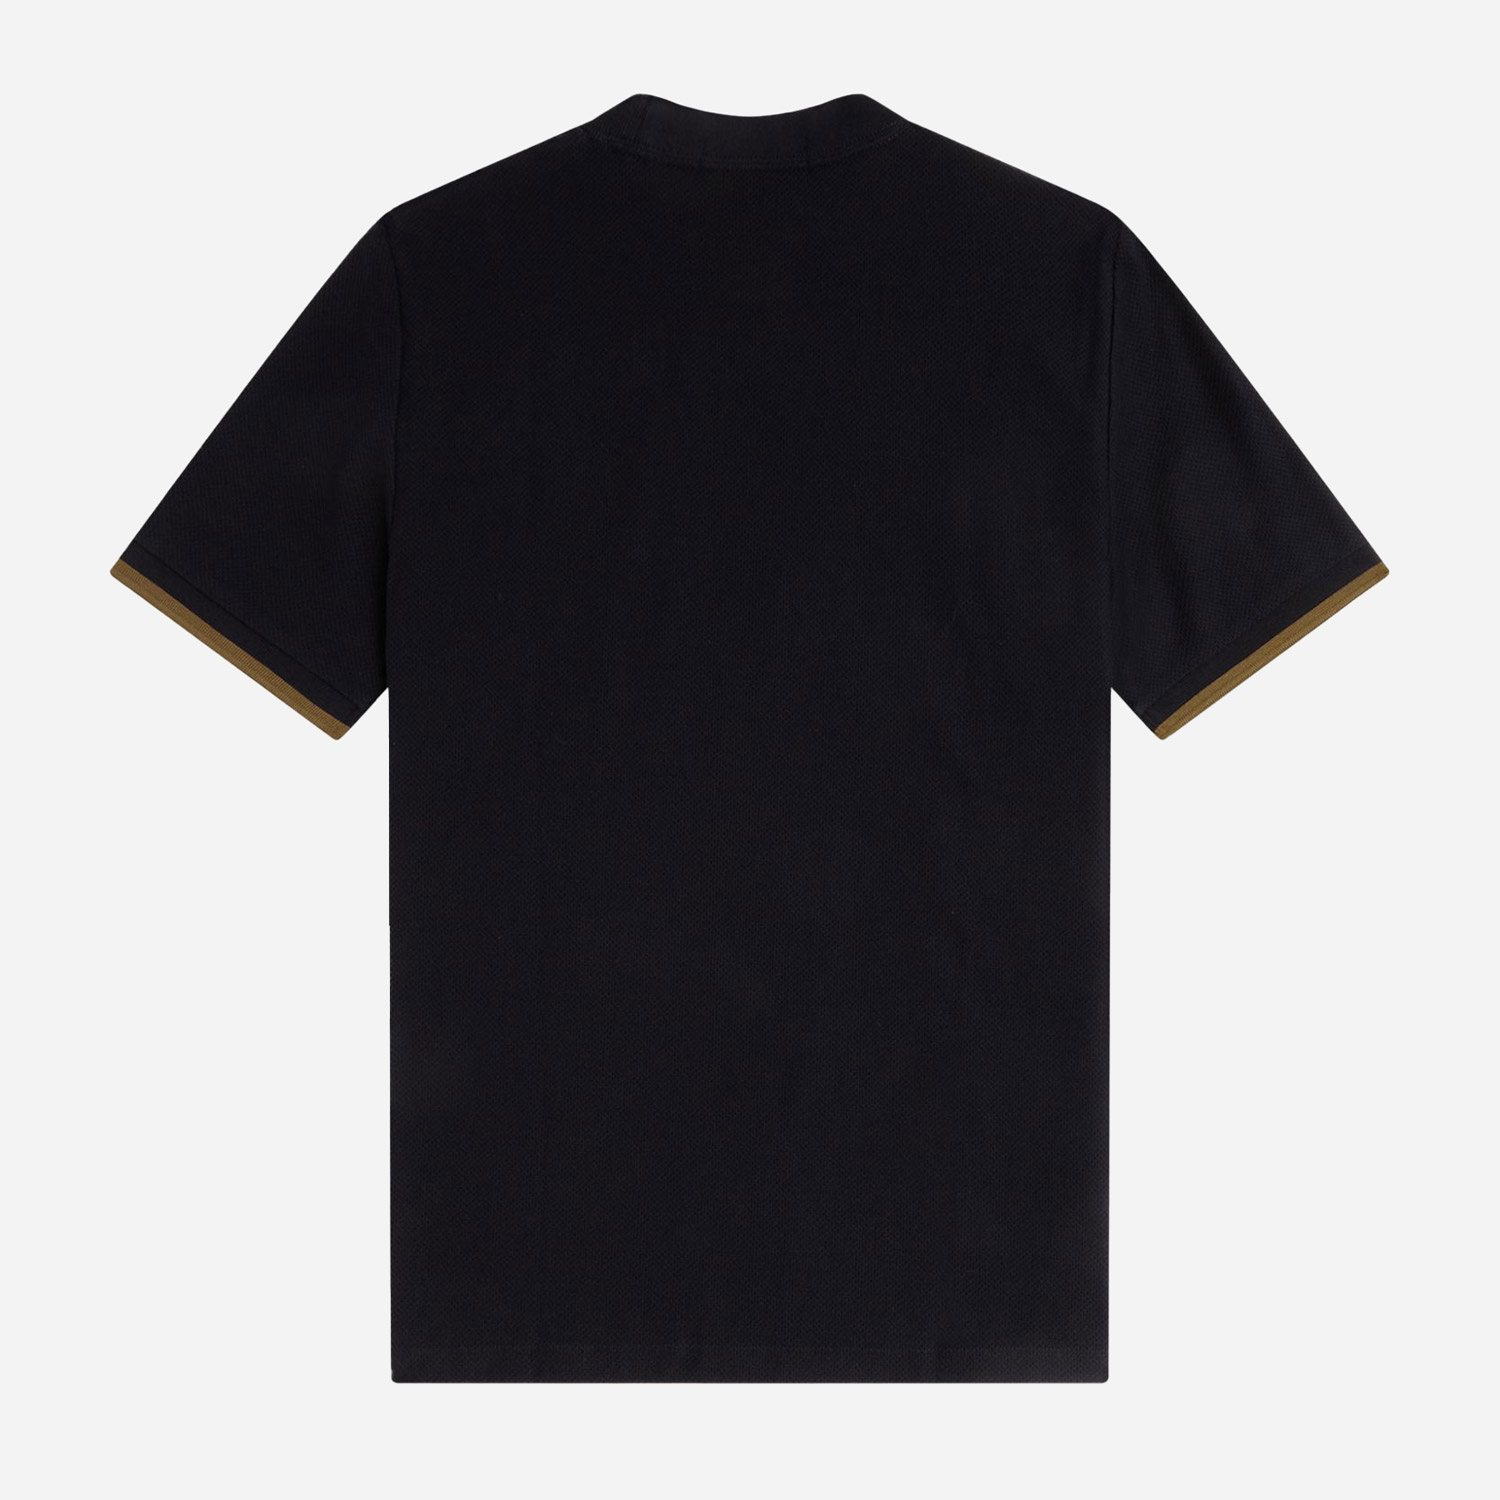 Fred Perry Tipped Cuff Pique Tee - Black